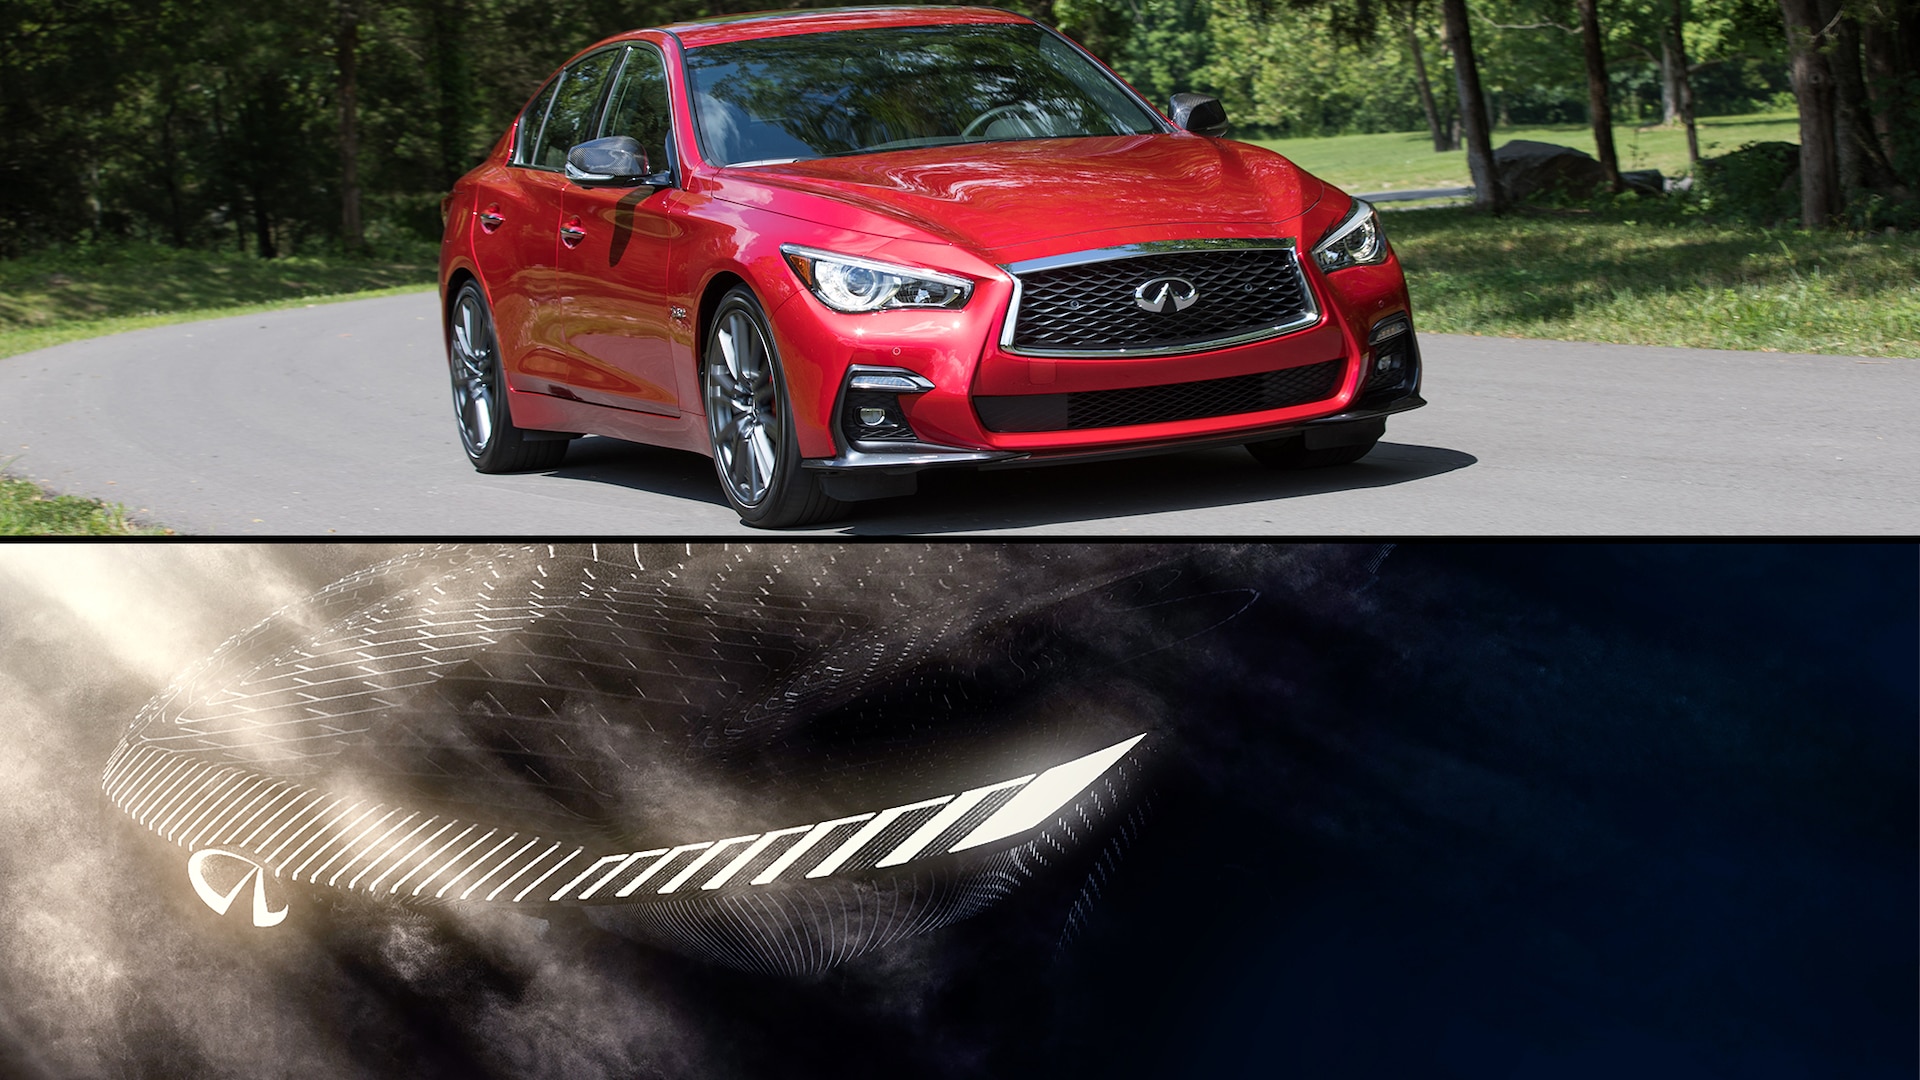 2023 Infiniti Cars: What's New With Q50 and Infiniti's Electric Future